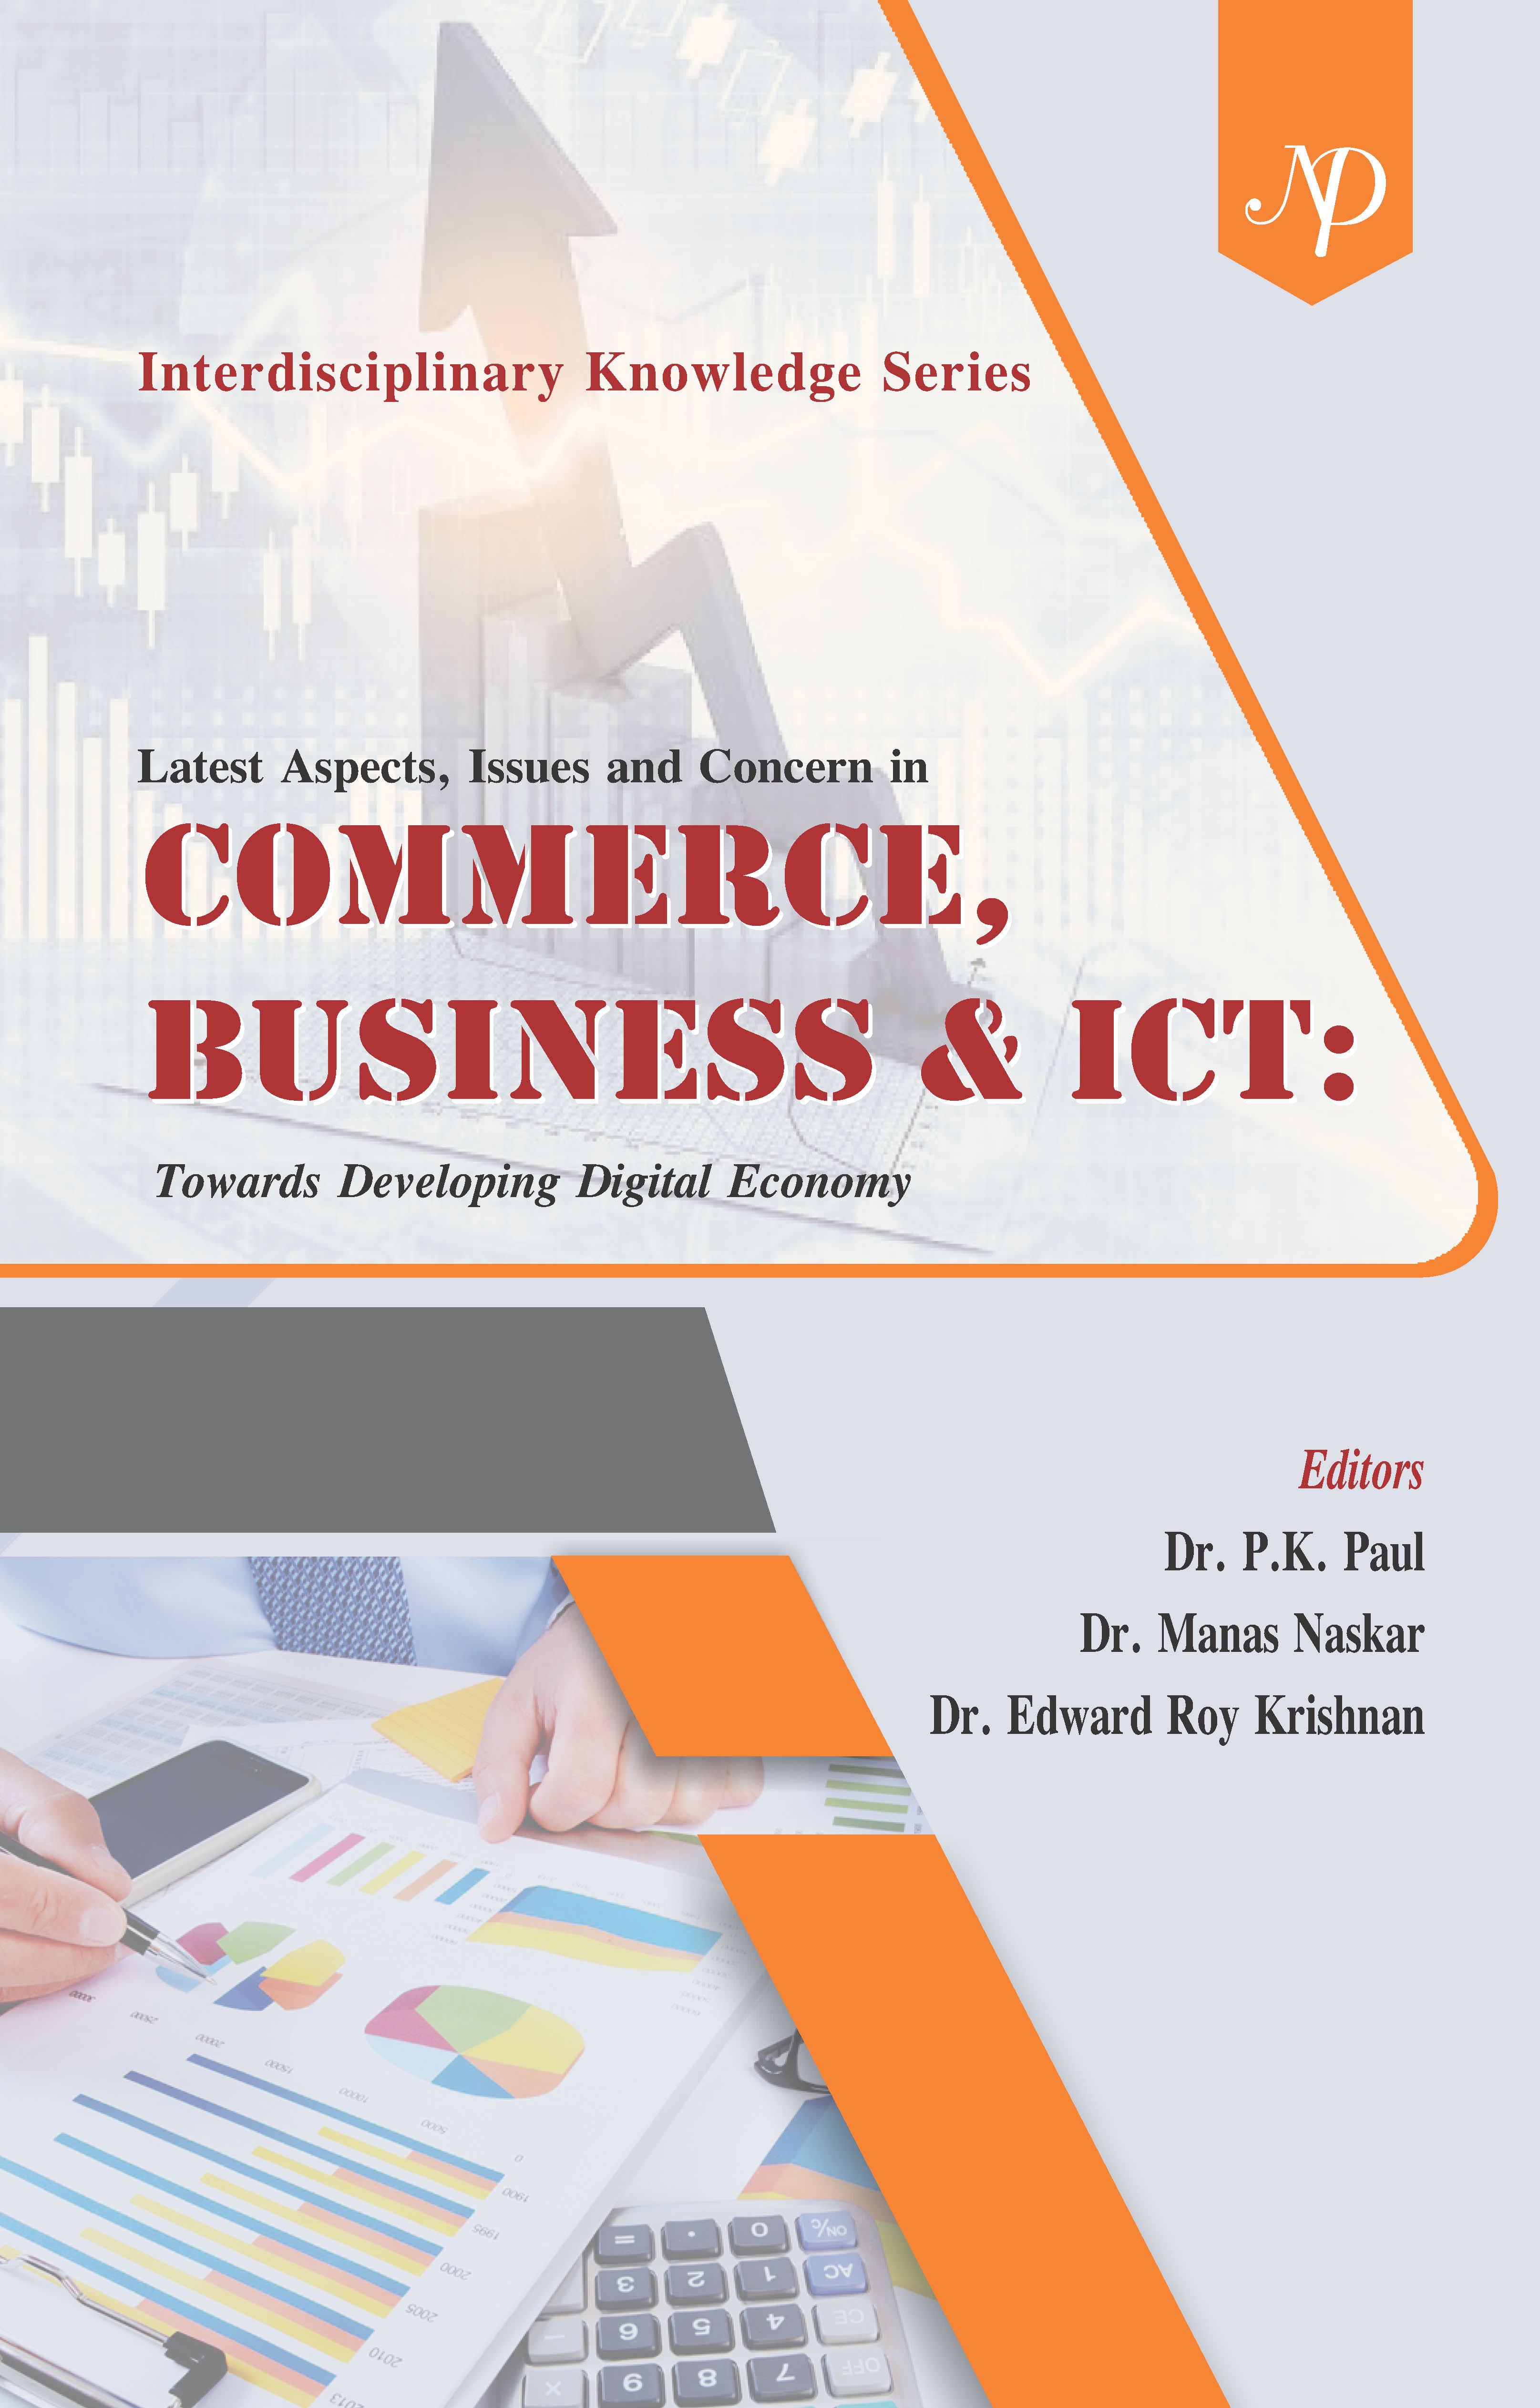 Latest Aspects, Issues and Concern in Commerce, Business & ICT: Towards Developing Digital Economy